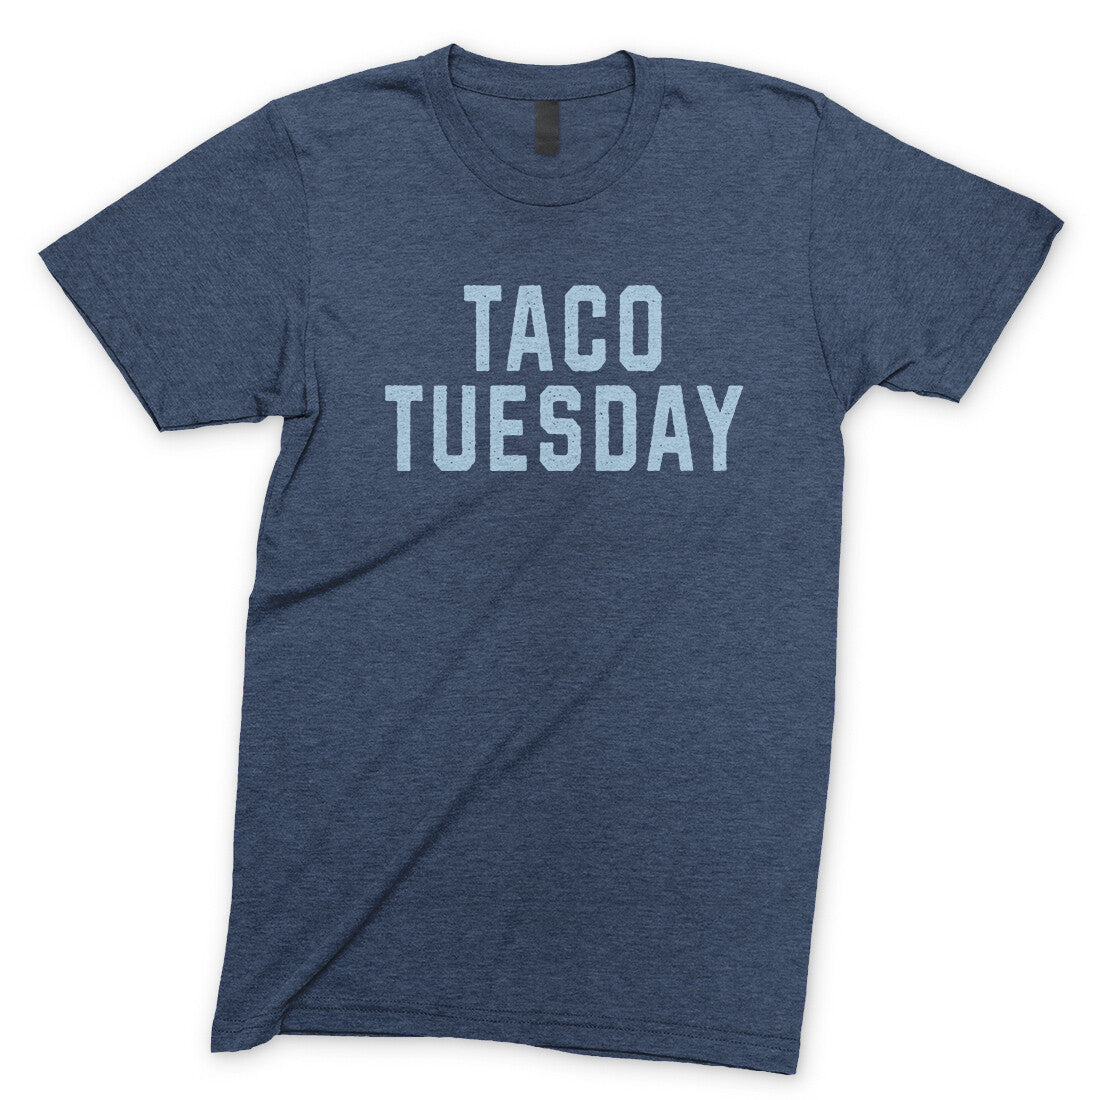 Taco Tuesday in Navy Heather Color